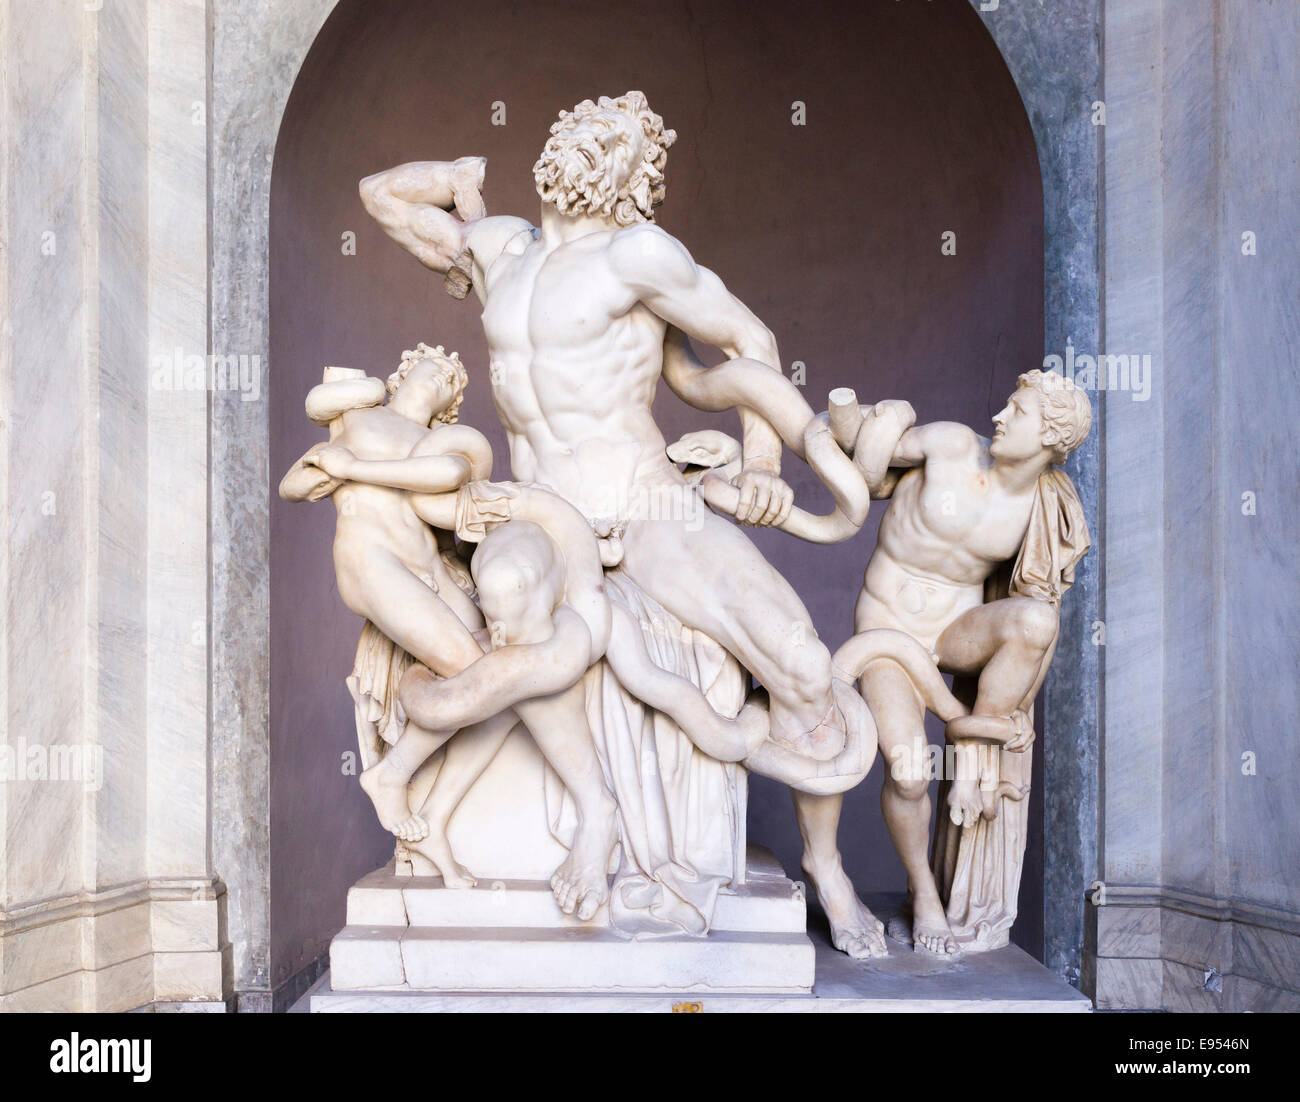 Laocoön and His Sons, sculpture by the sculptor Hagesandros, Polydorus and Athanadoros from Rhodes, Cortile Ottagono Stock Photo